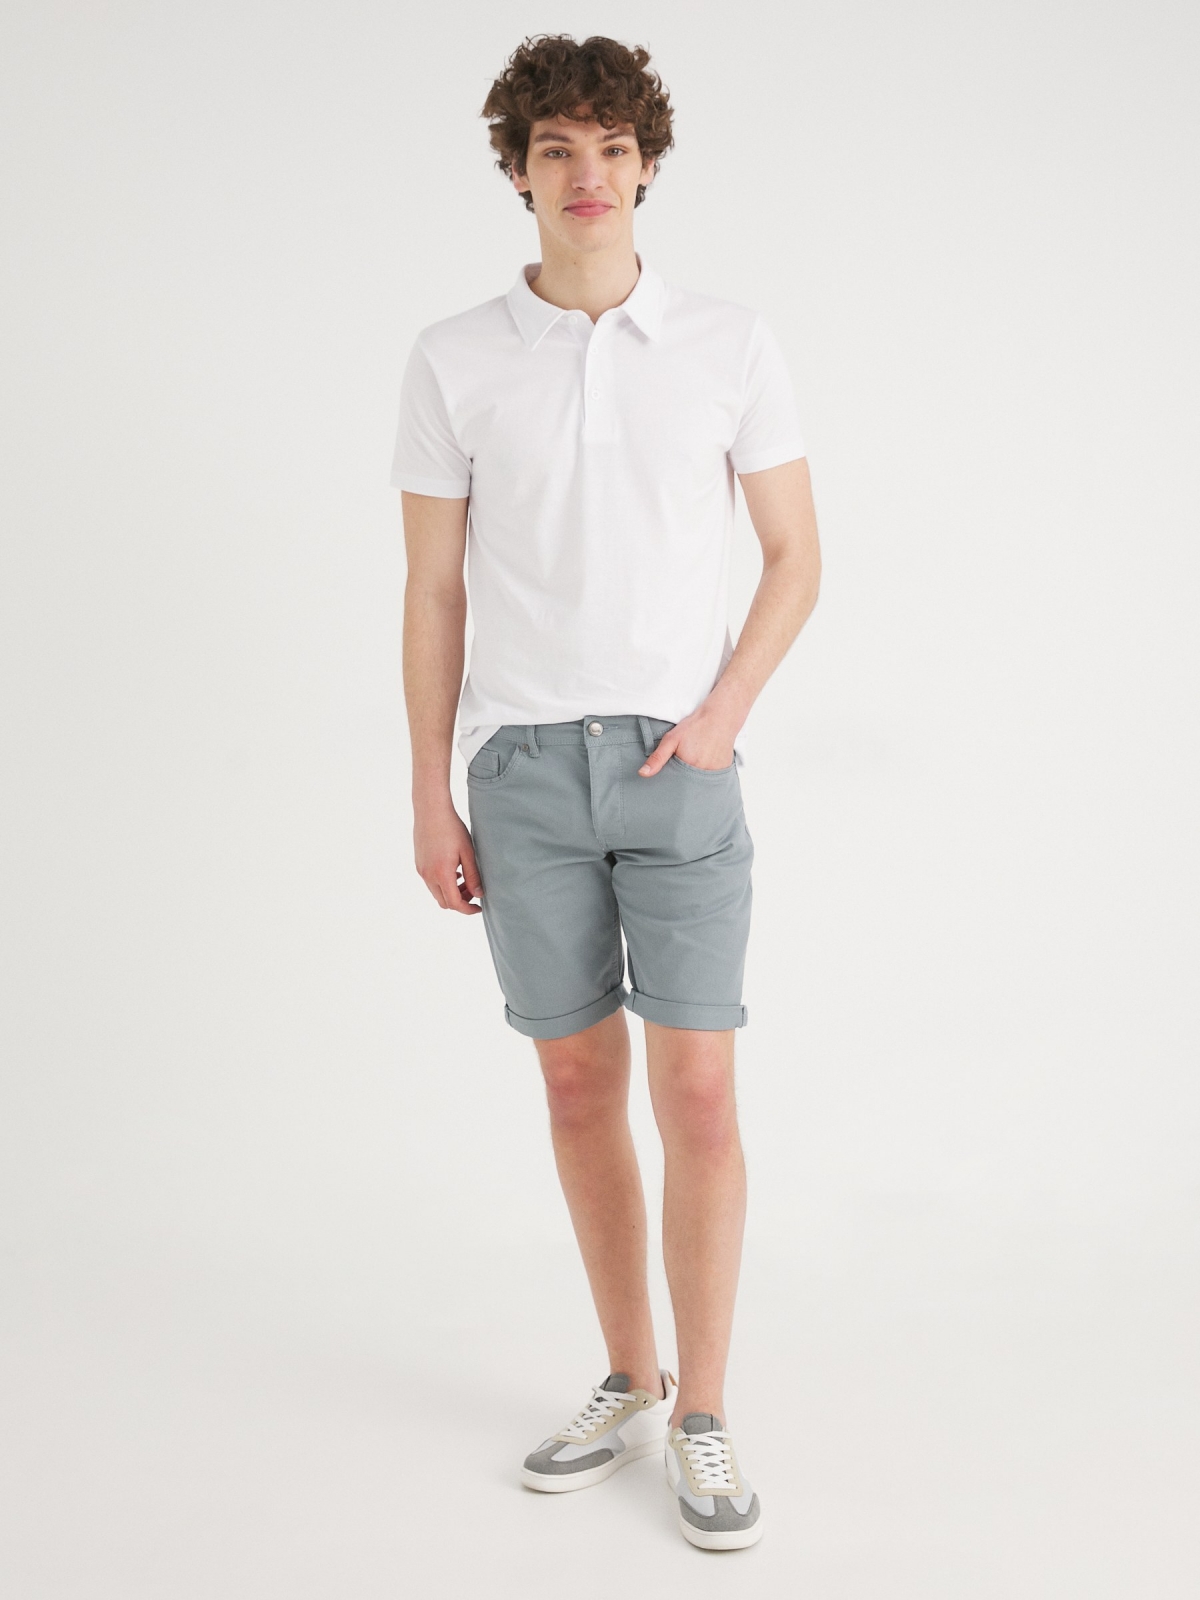 Bermuda short with five pockets grey front view